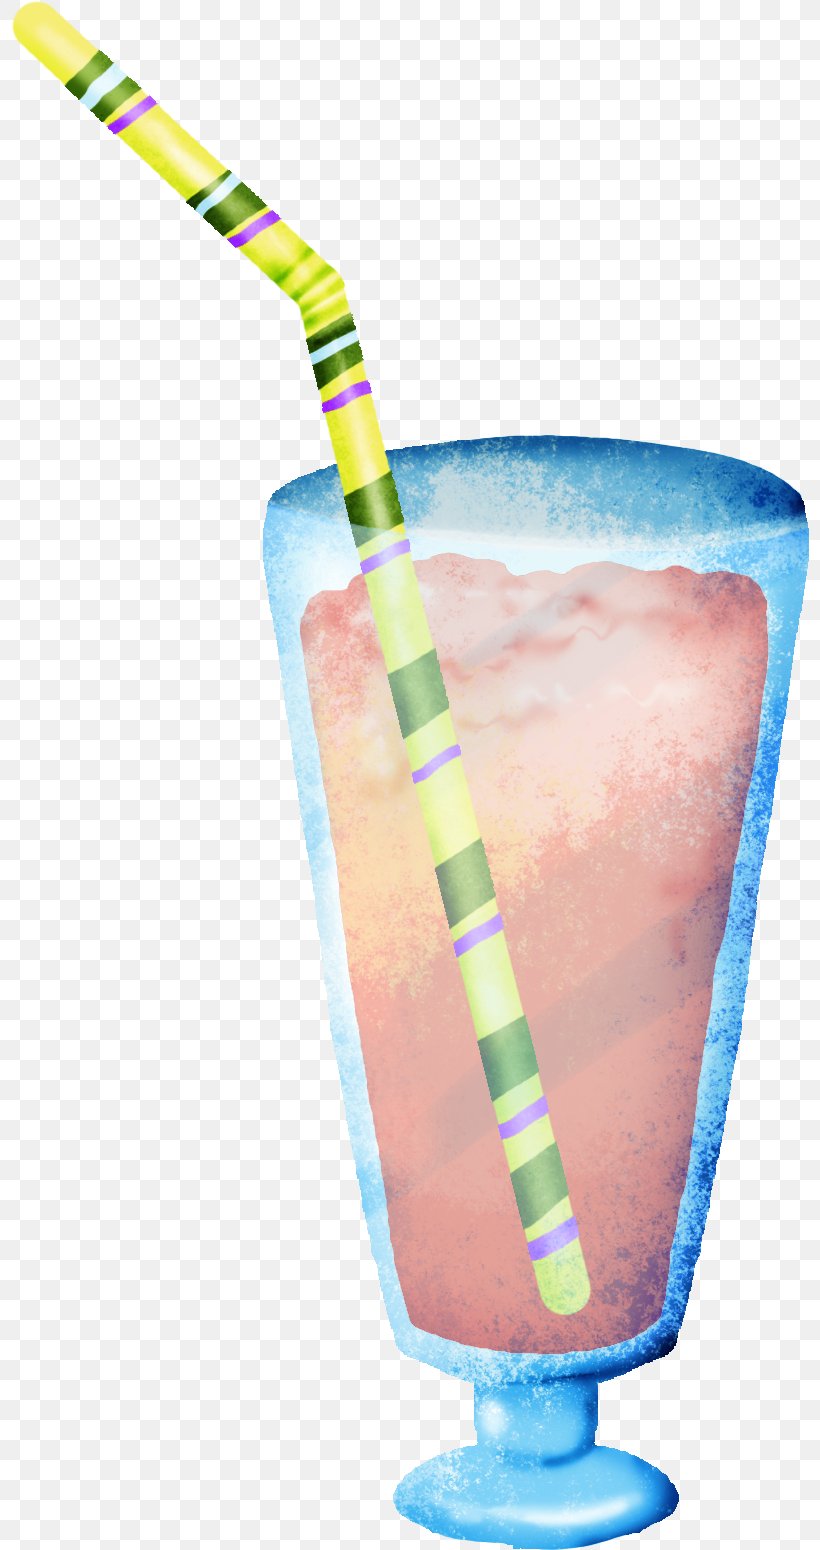 Juice Non-alcoholic Drink Drinking Straw Cup, PNG, 798x1550px, Juice, Cocktail Garnish, Cup, Designer, Drink Download Free